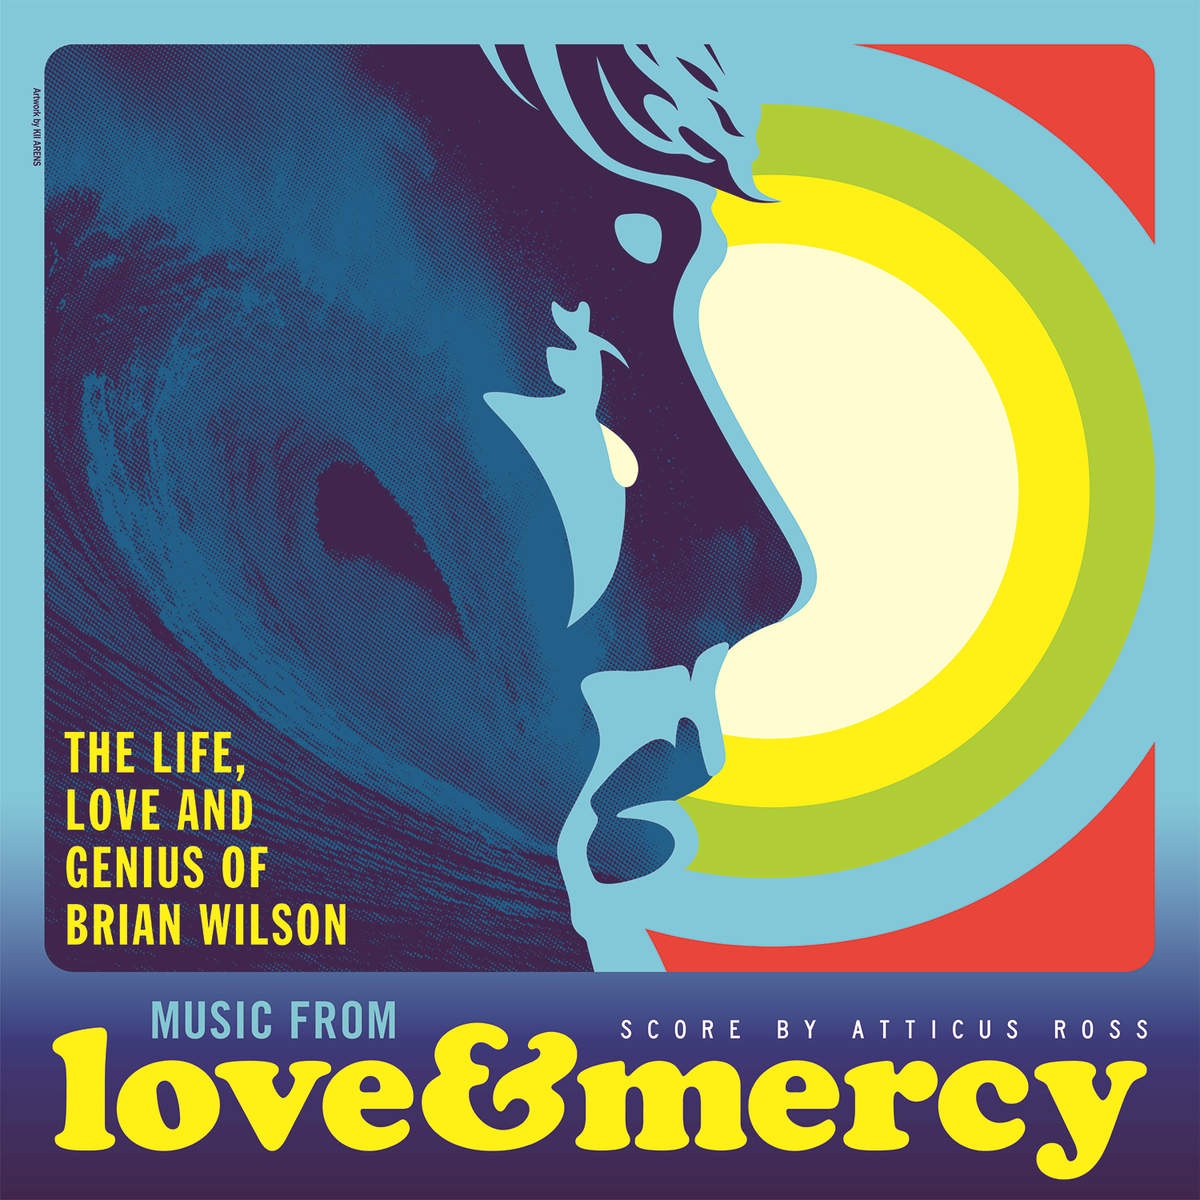 One Kind Of Love - From “Love & Mercy – The Life, Love And Genius Of Brian Wilson” Soundtrack